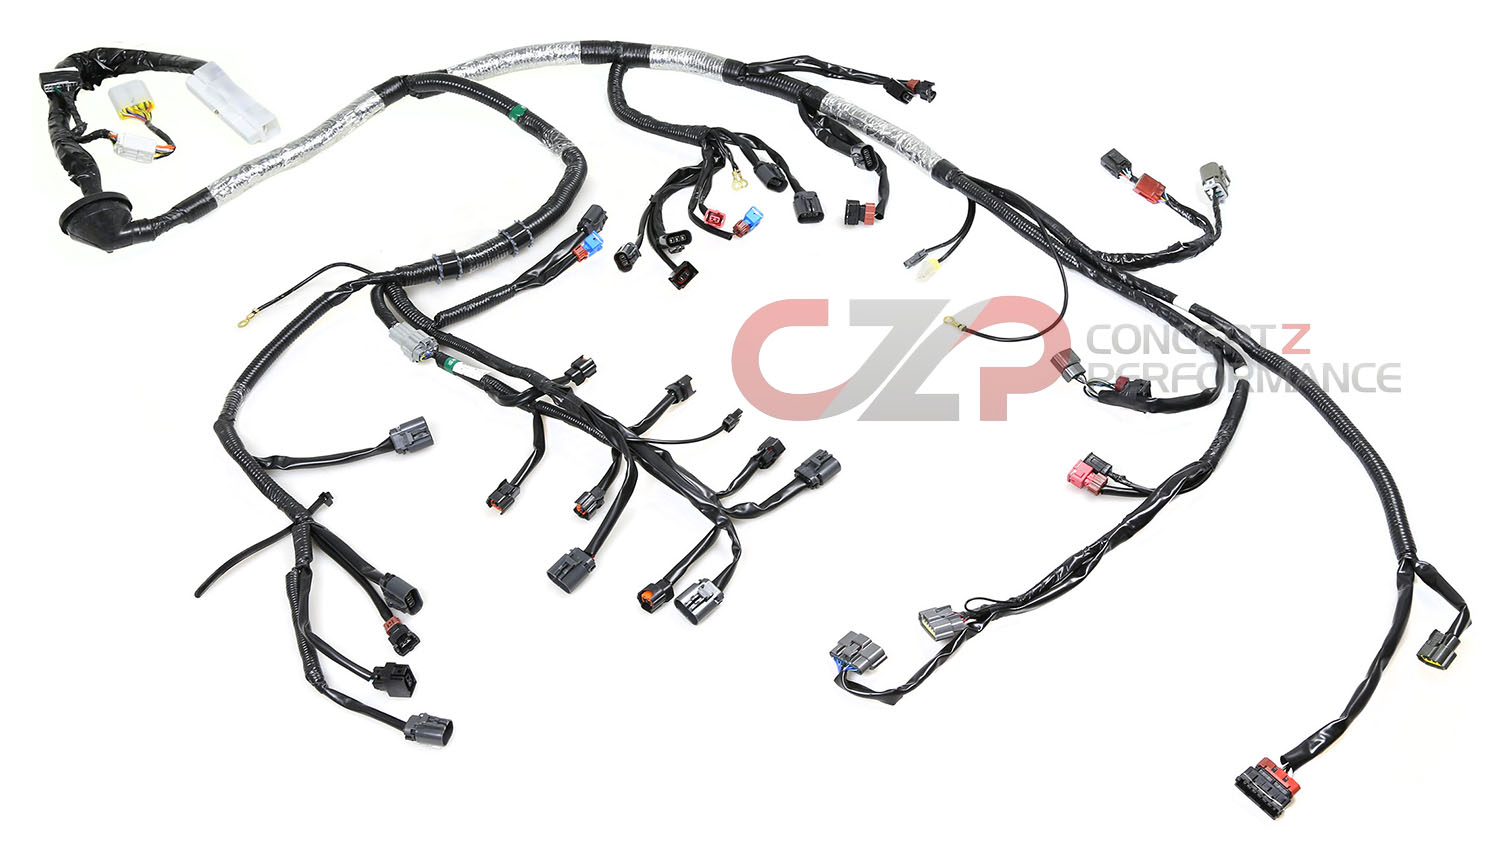 Wiring Specialties EFI Engine Wiring Harness w/ Quick Disconnect, Left Hand Driver LHD - Nissan 300ZX 90-95 Z32